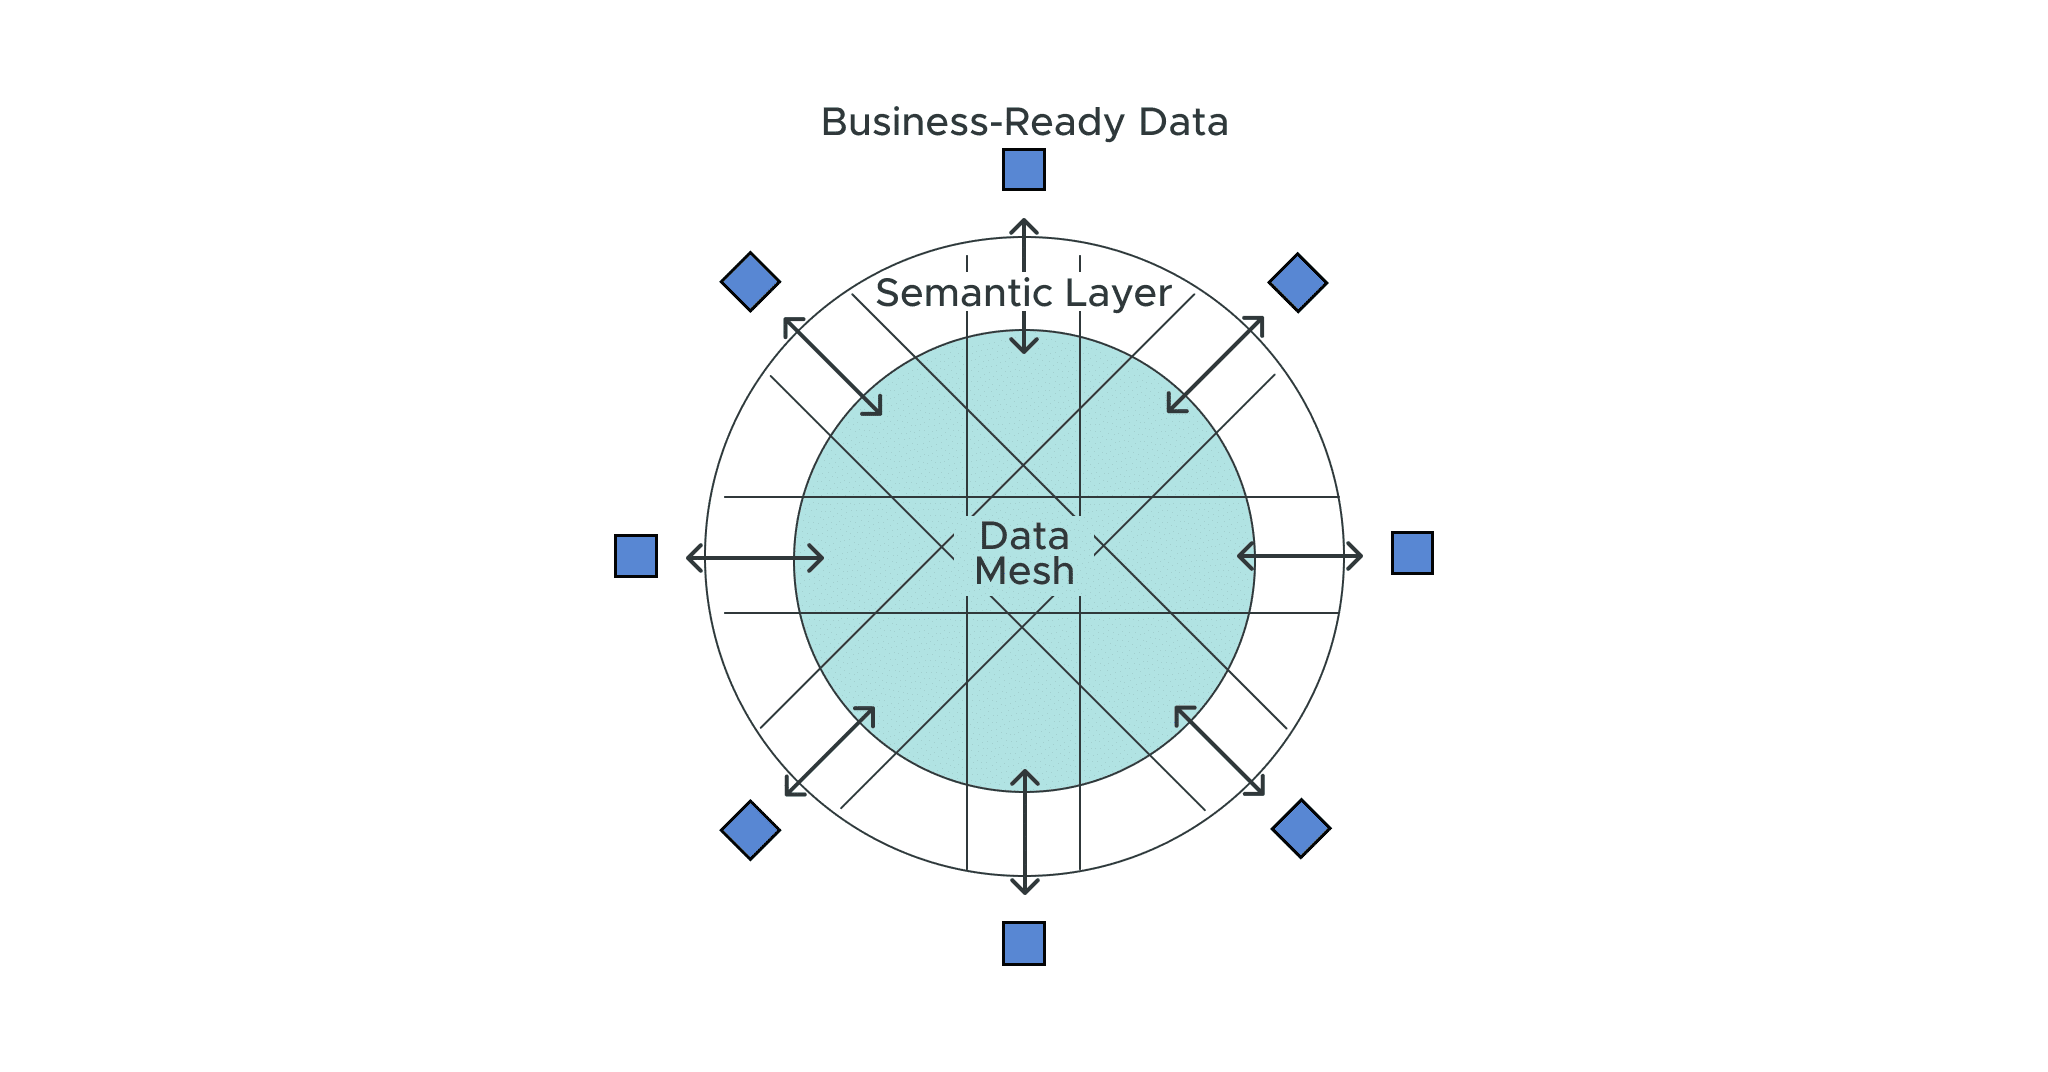 How Data Mesh Success Depends on Business-Ready Data